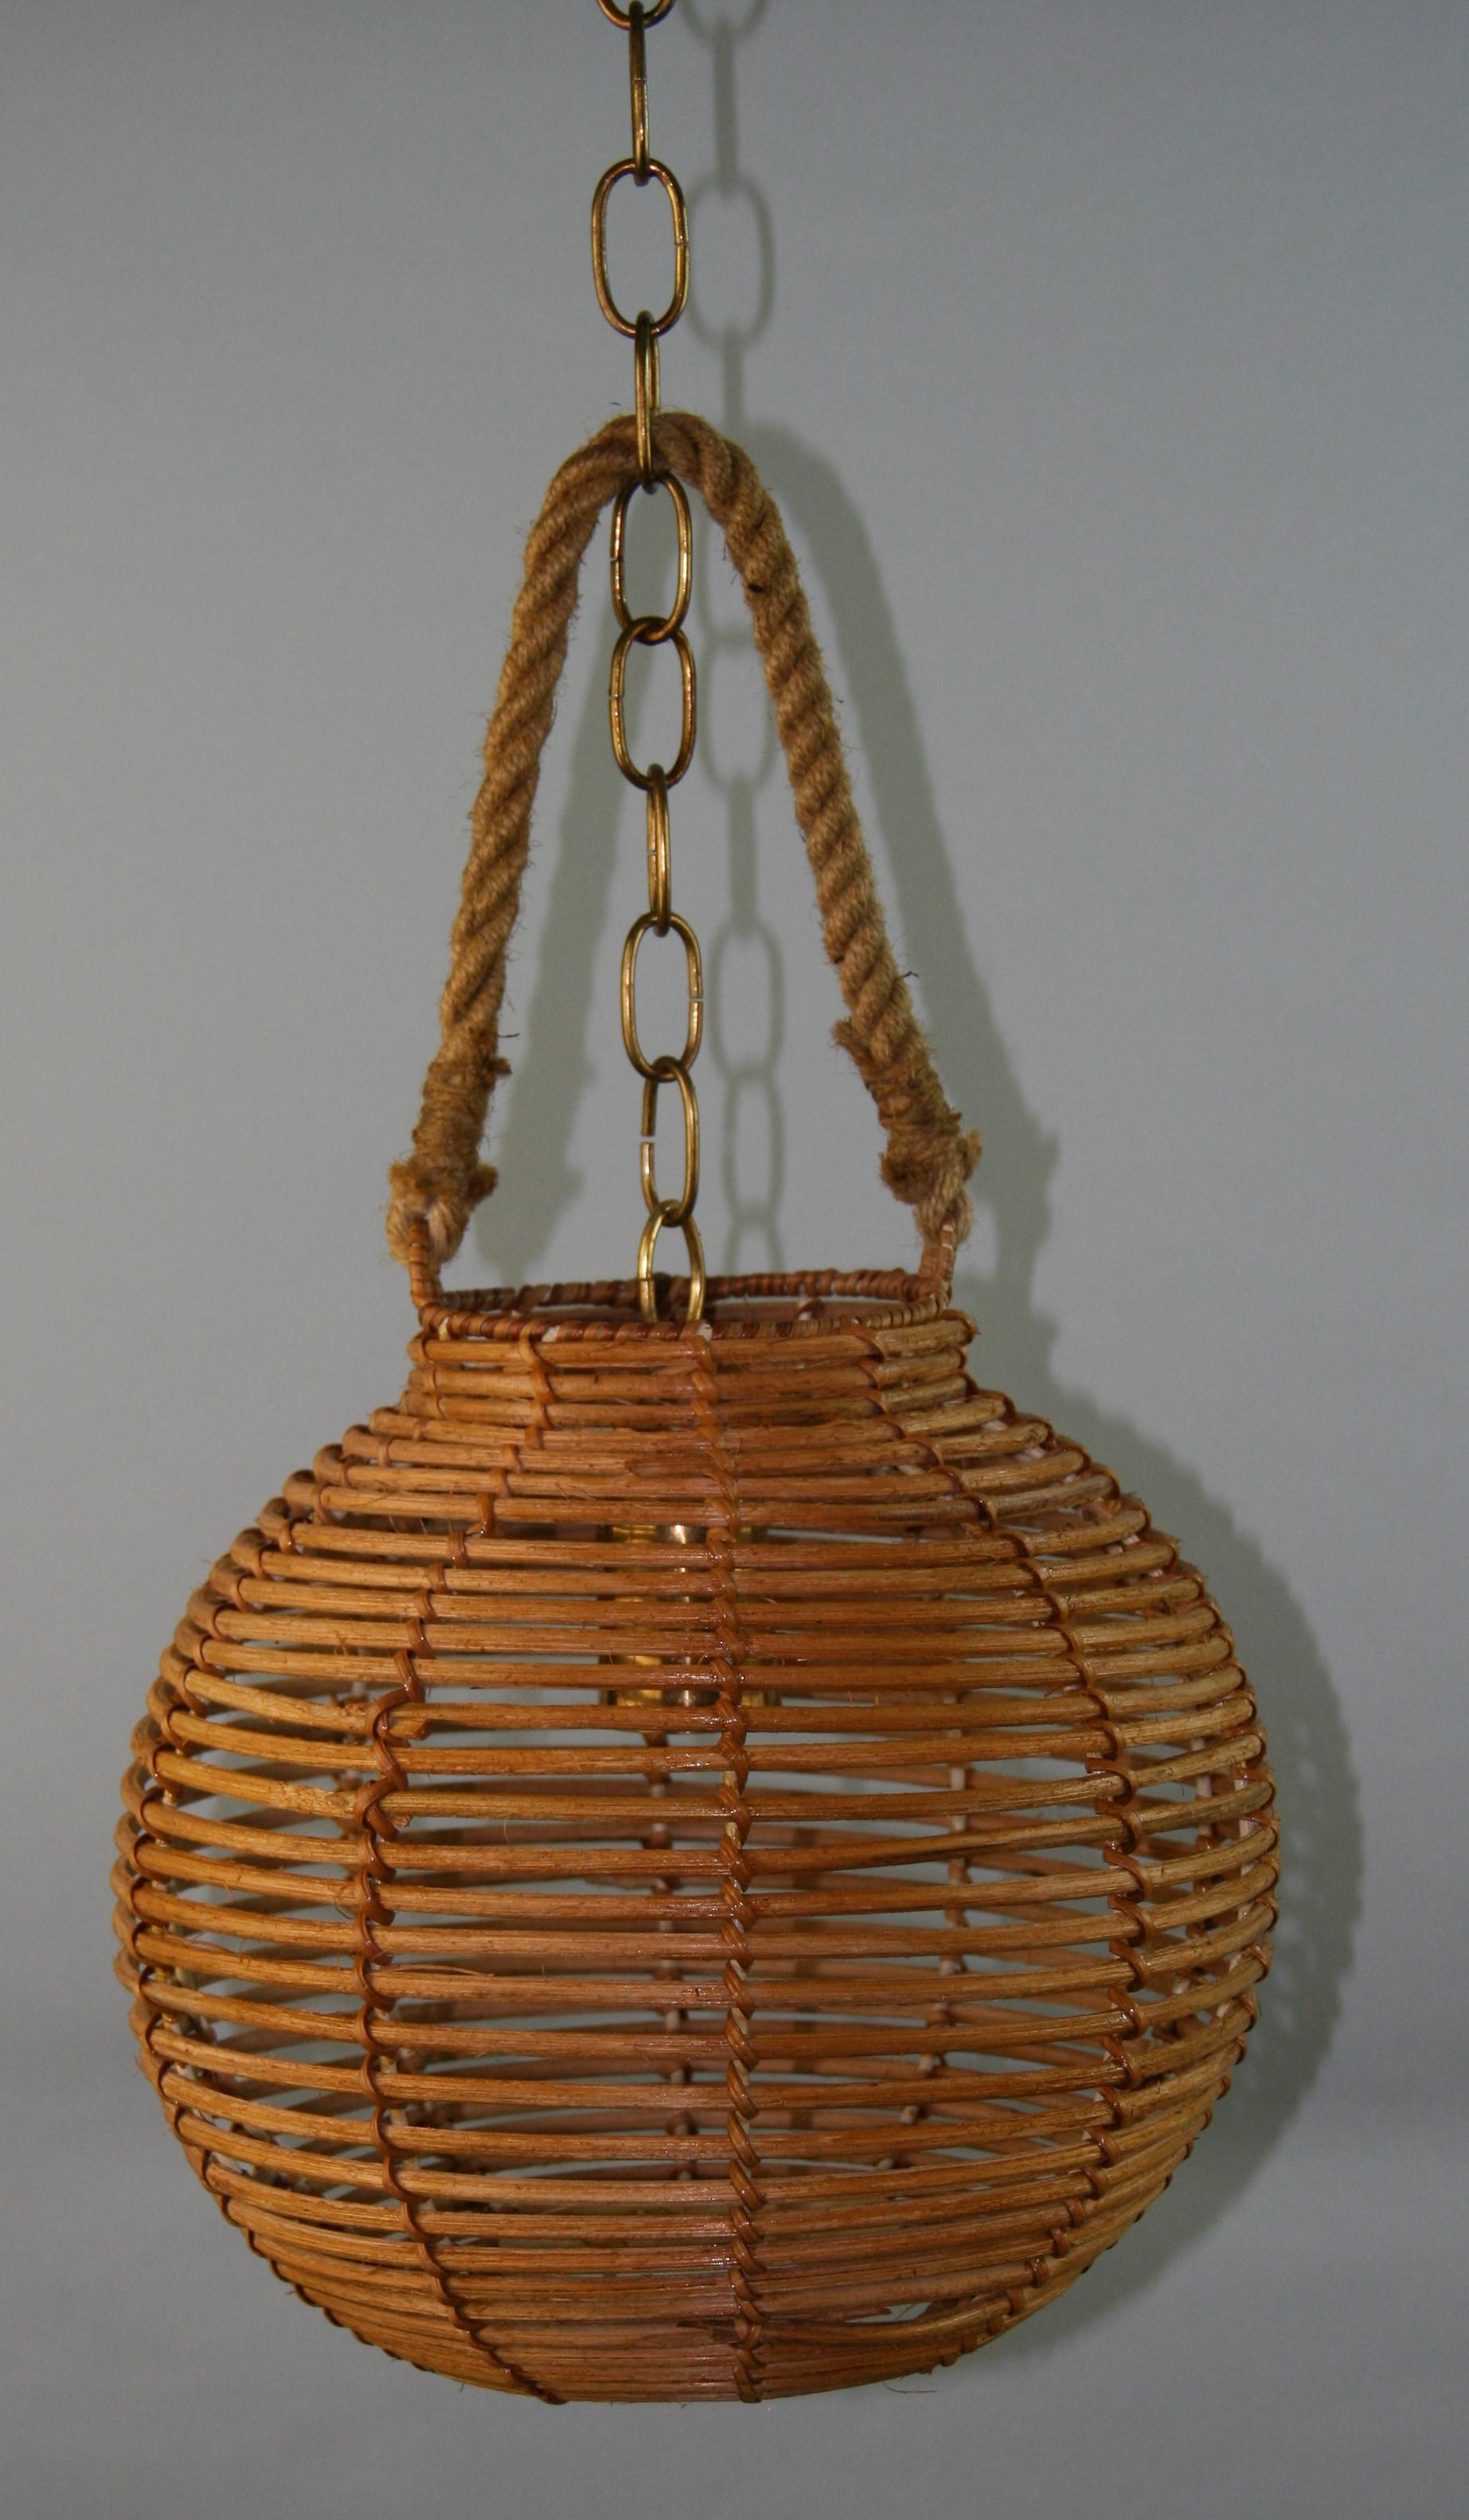 Basket wicker pendant
Rewired take one 100 Watt Edison bulb
Supplied with 2 feet of chain and canopy.